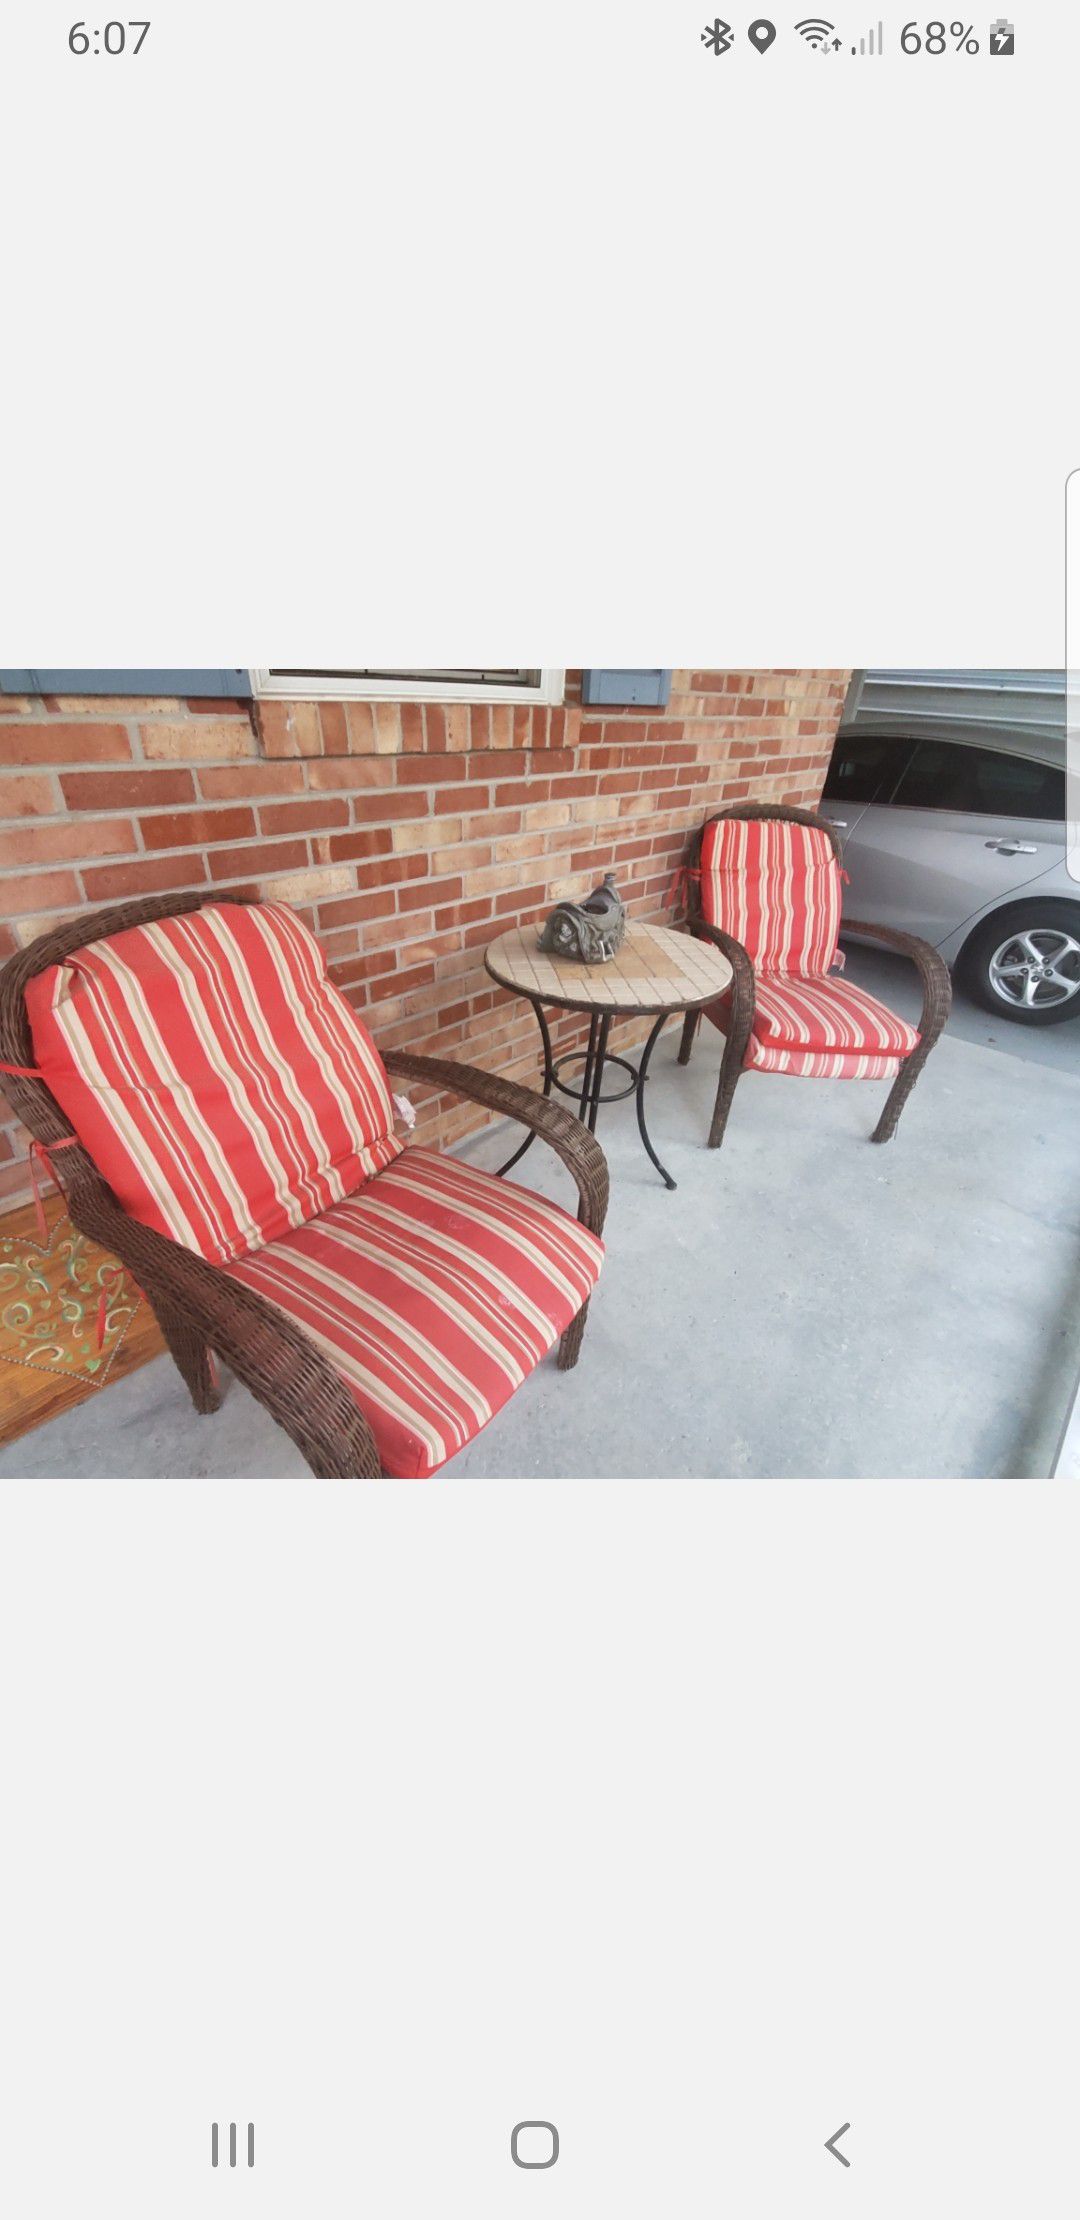 Outside patio bistro set with wicker chairs